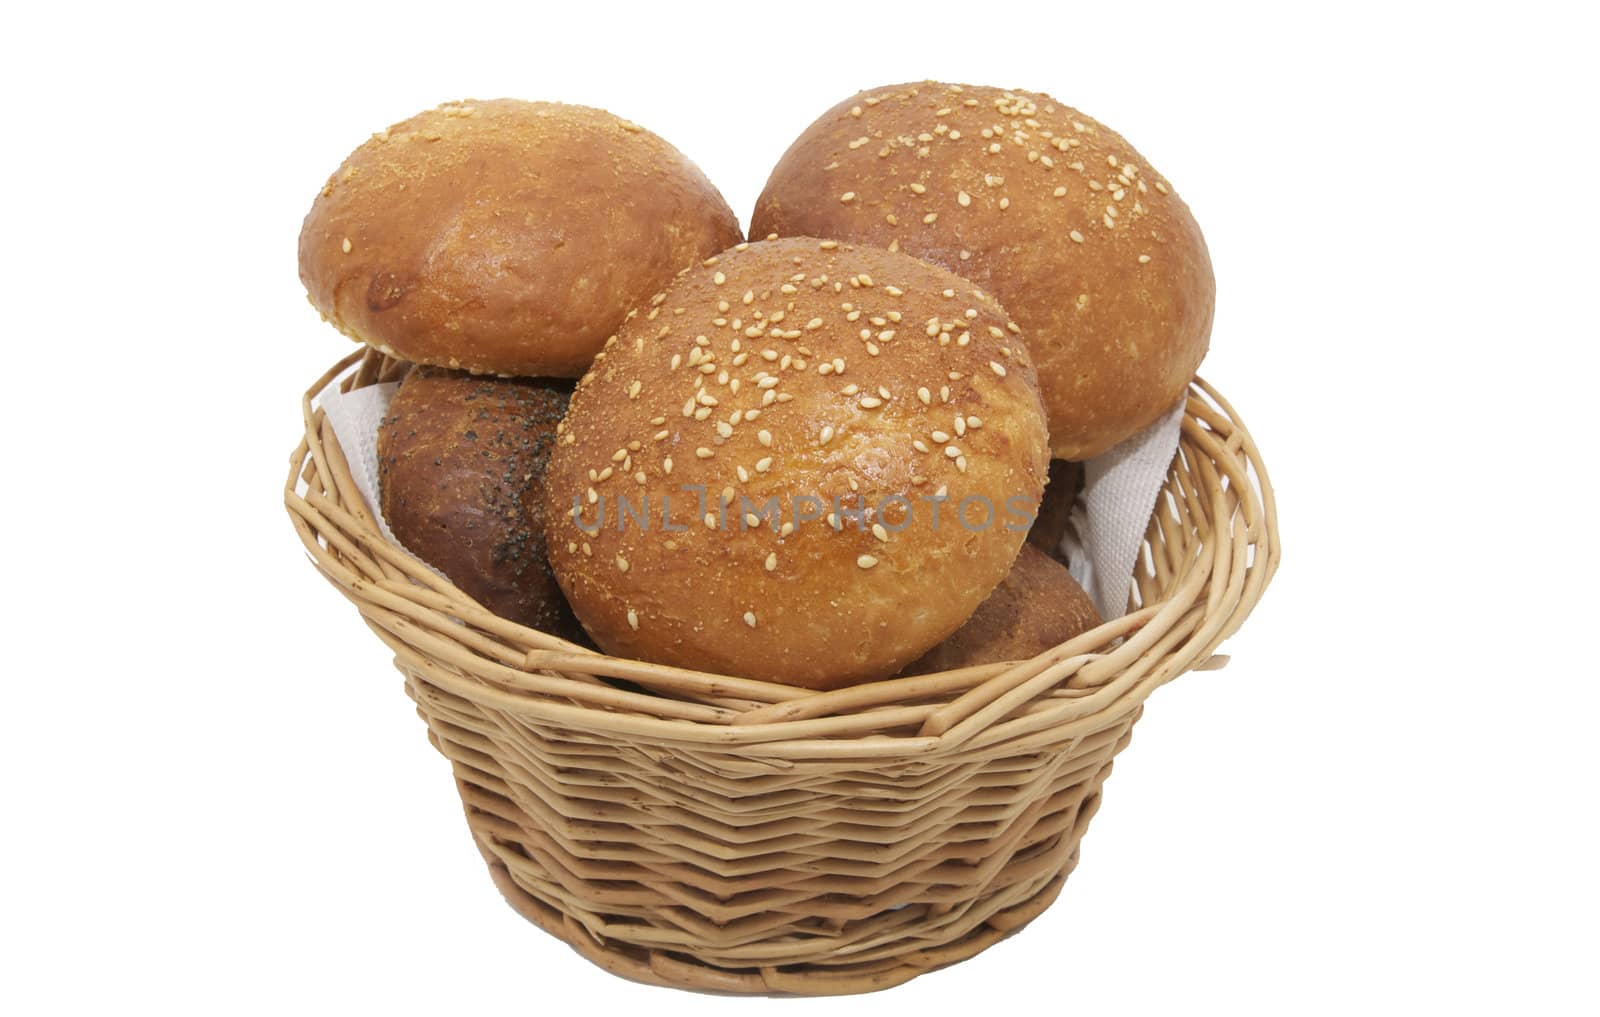 buns with sesame seeds in a wicker basket